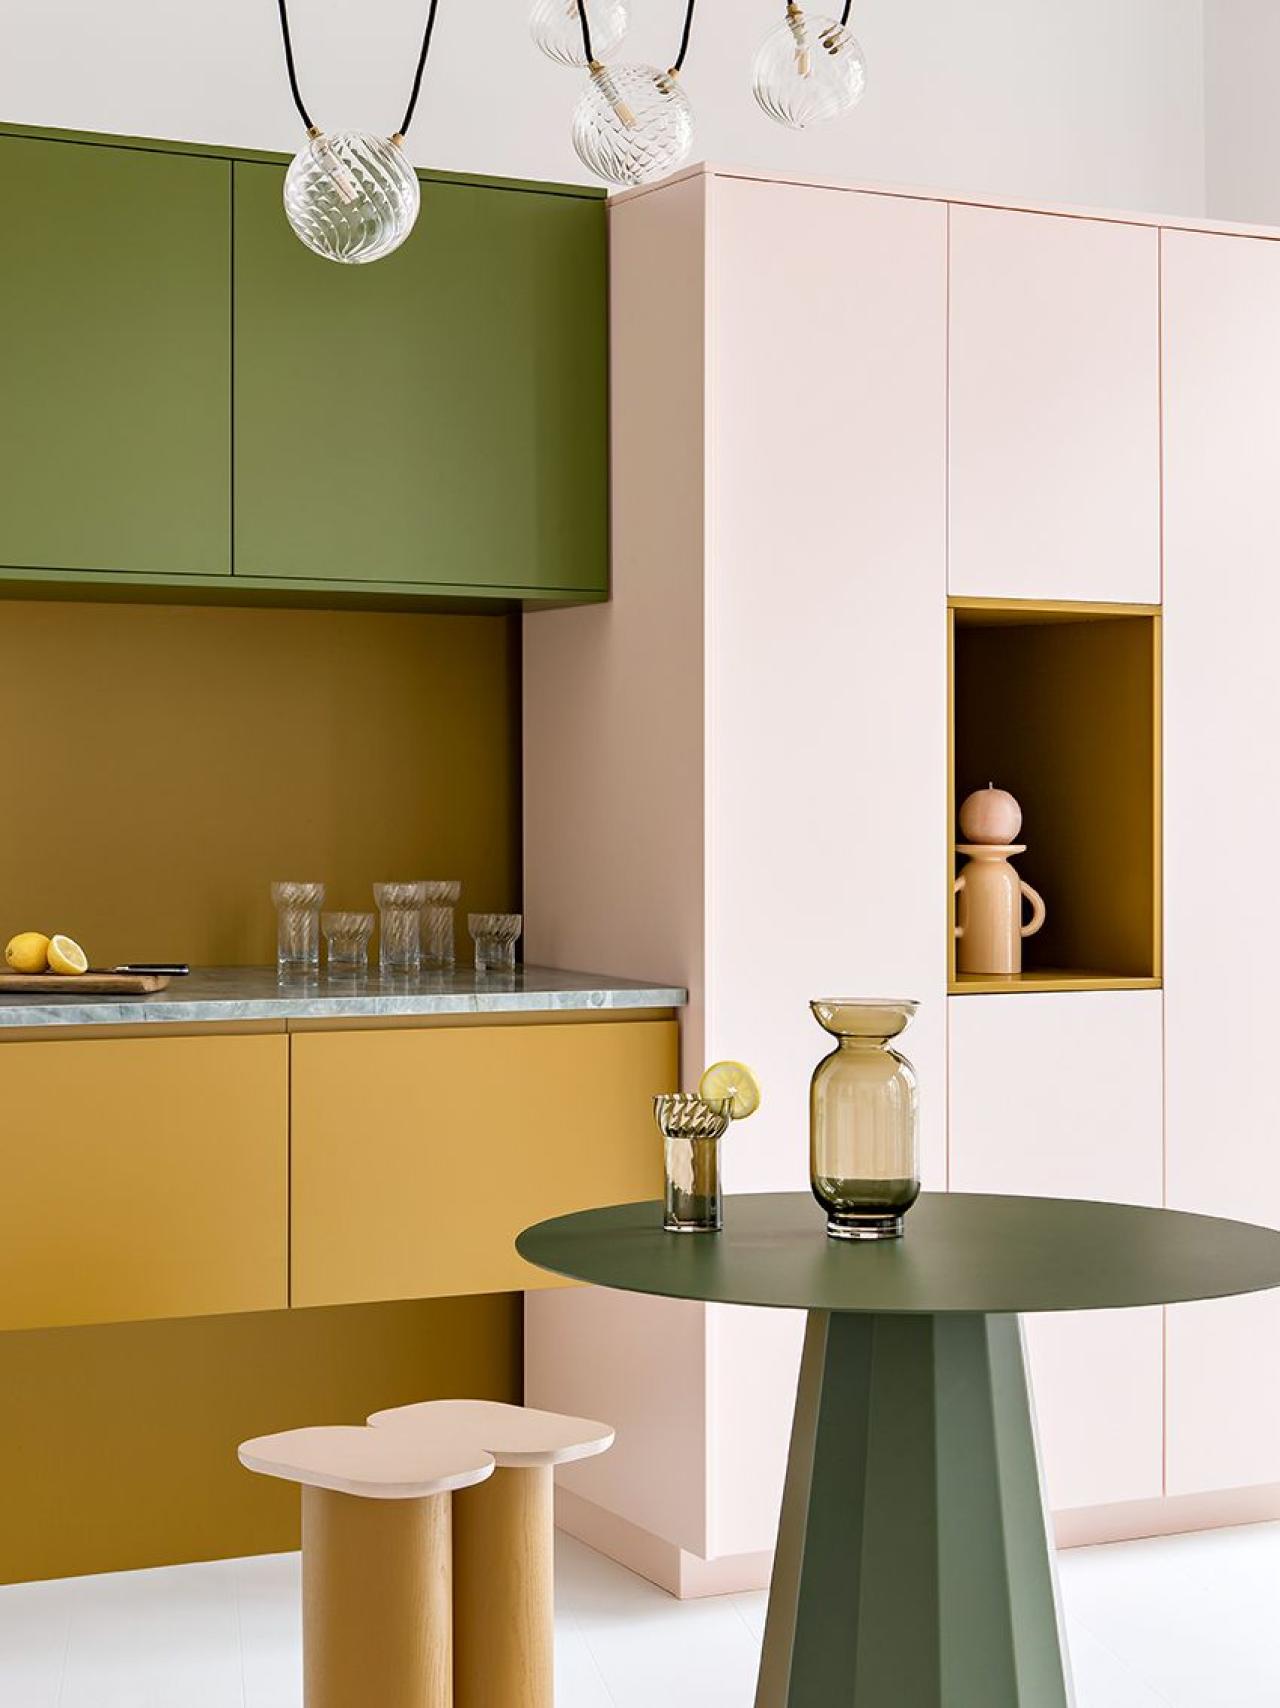 A kitchen in Ocre, Rose calcaire and Romarin by Margaux Keller